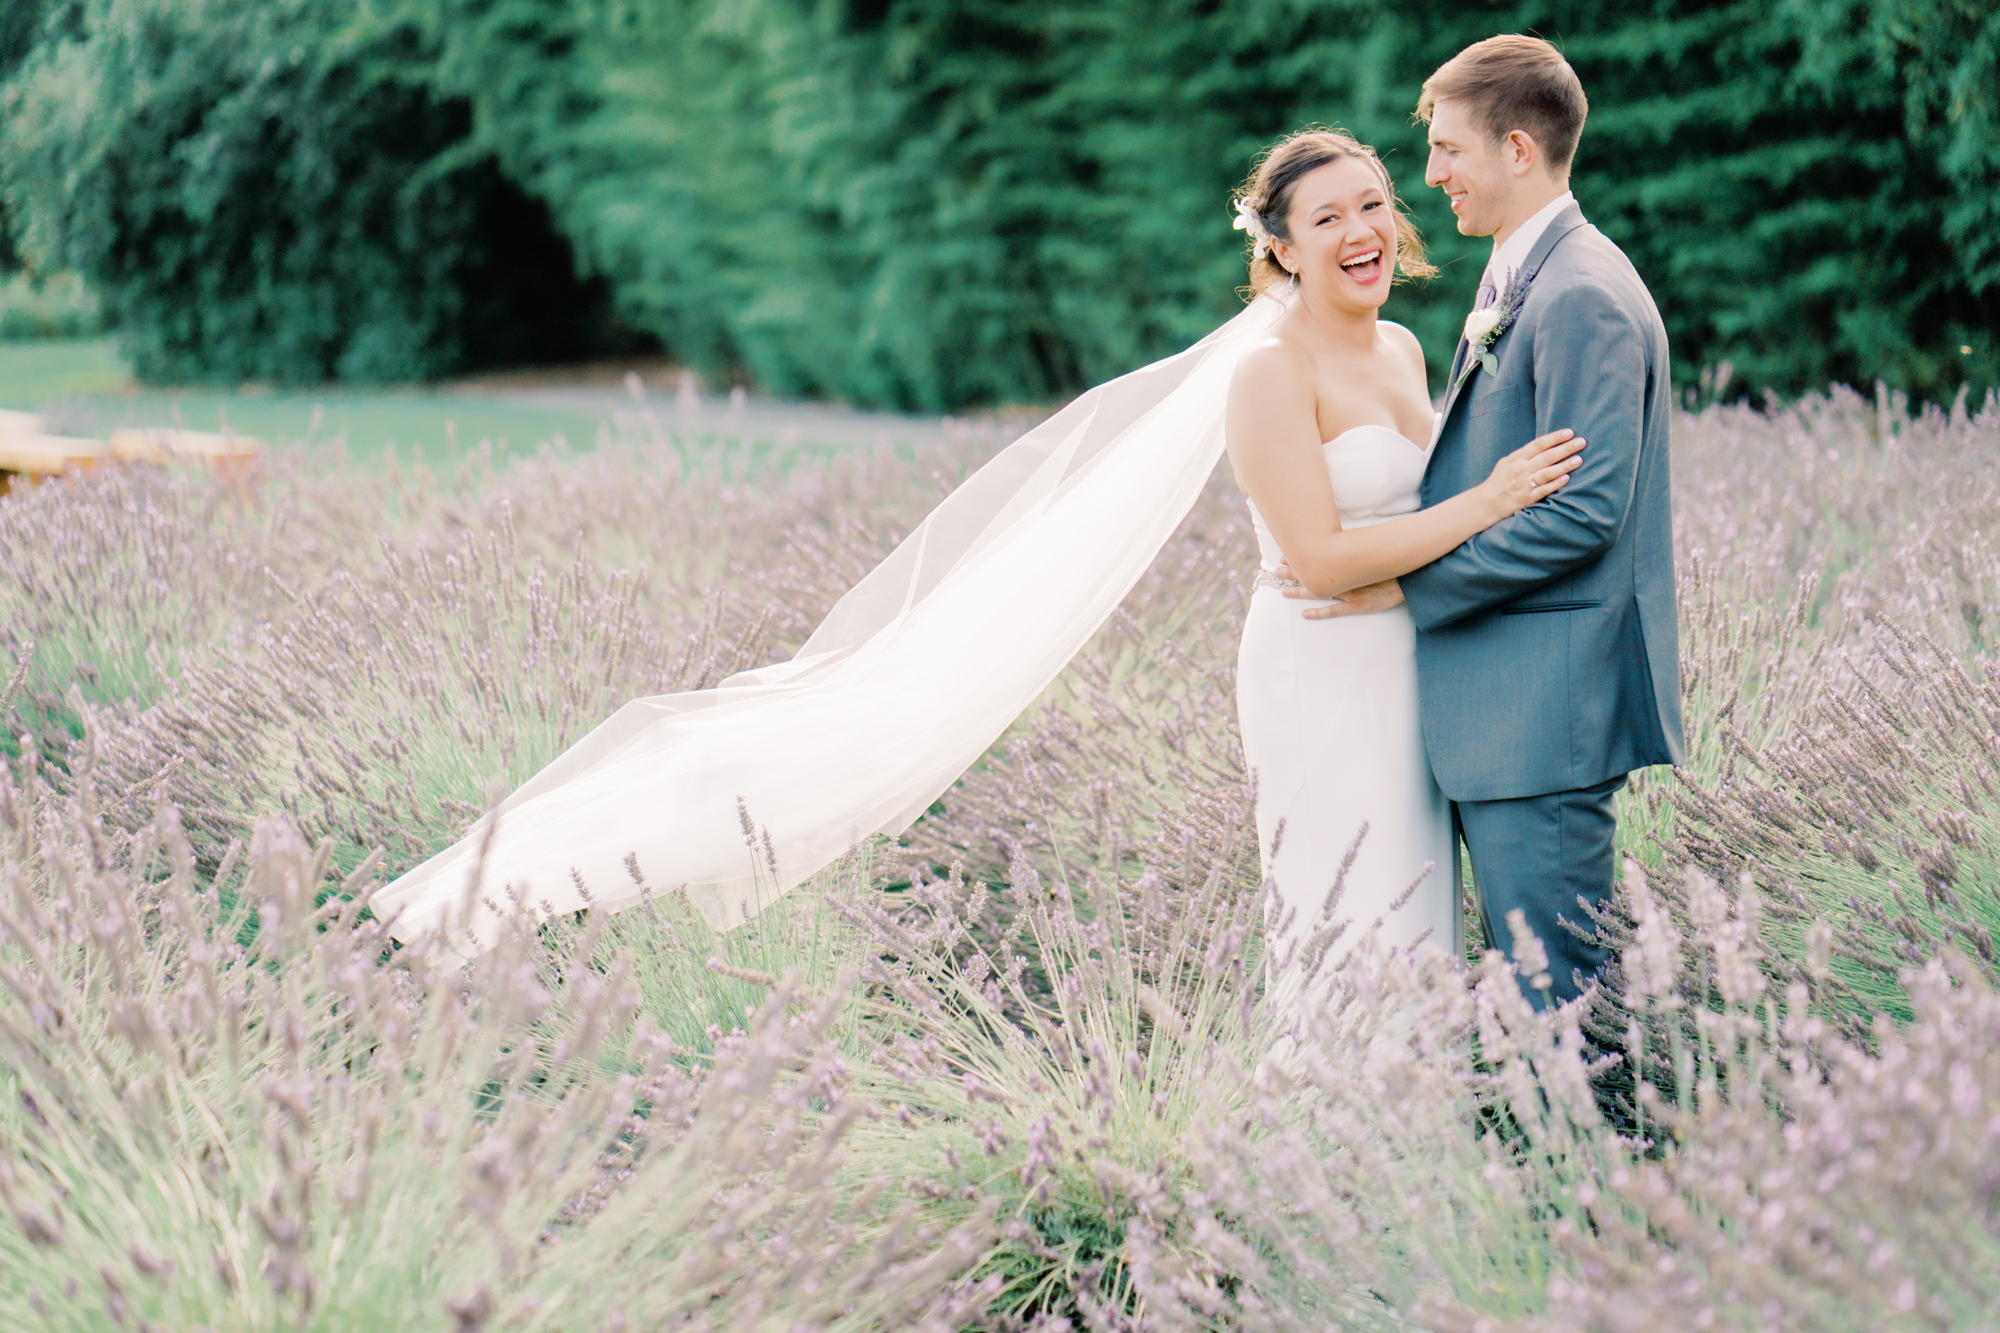 Woodinville Lavender Farm weddings: Lindsay and Andres wedding portrait